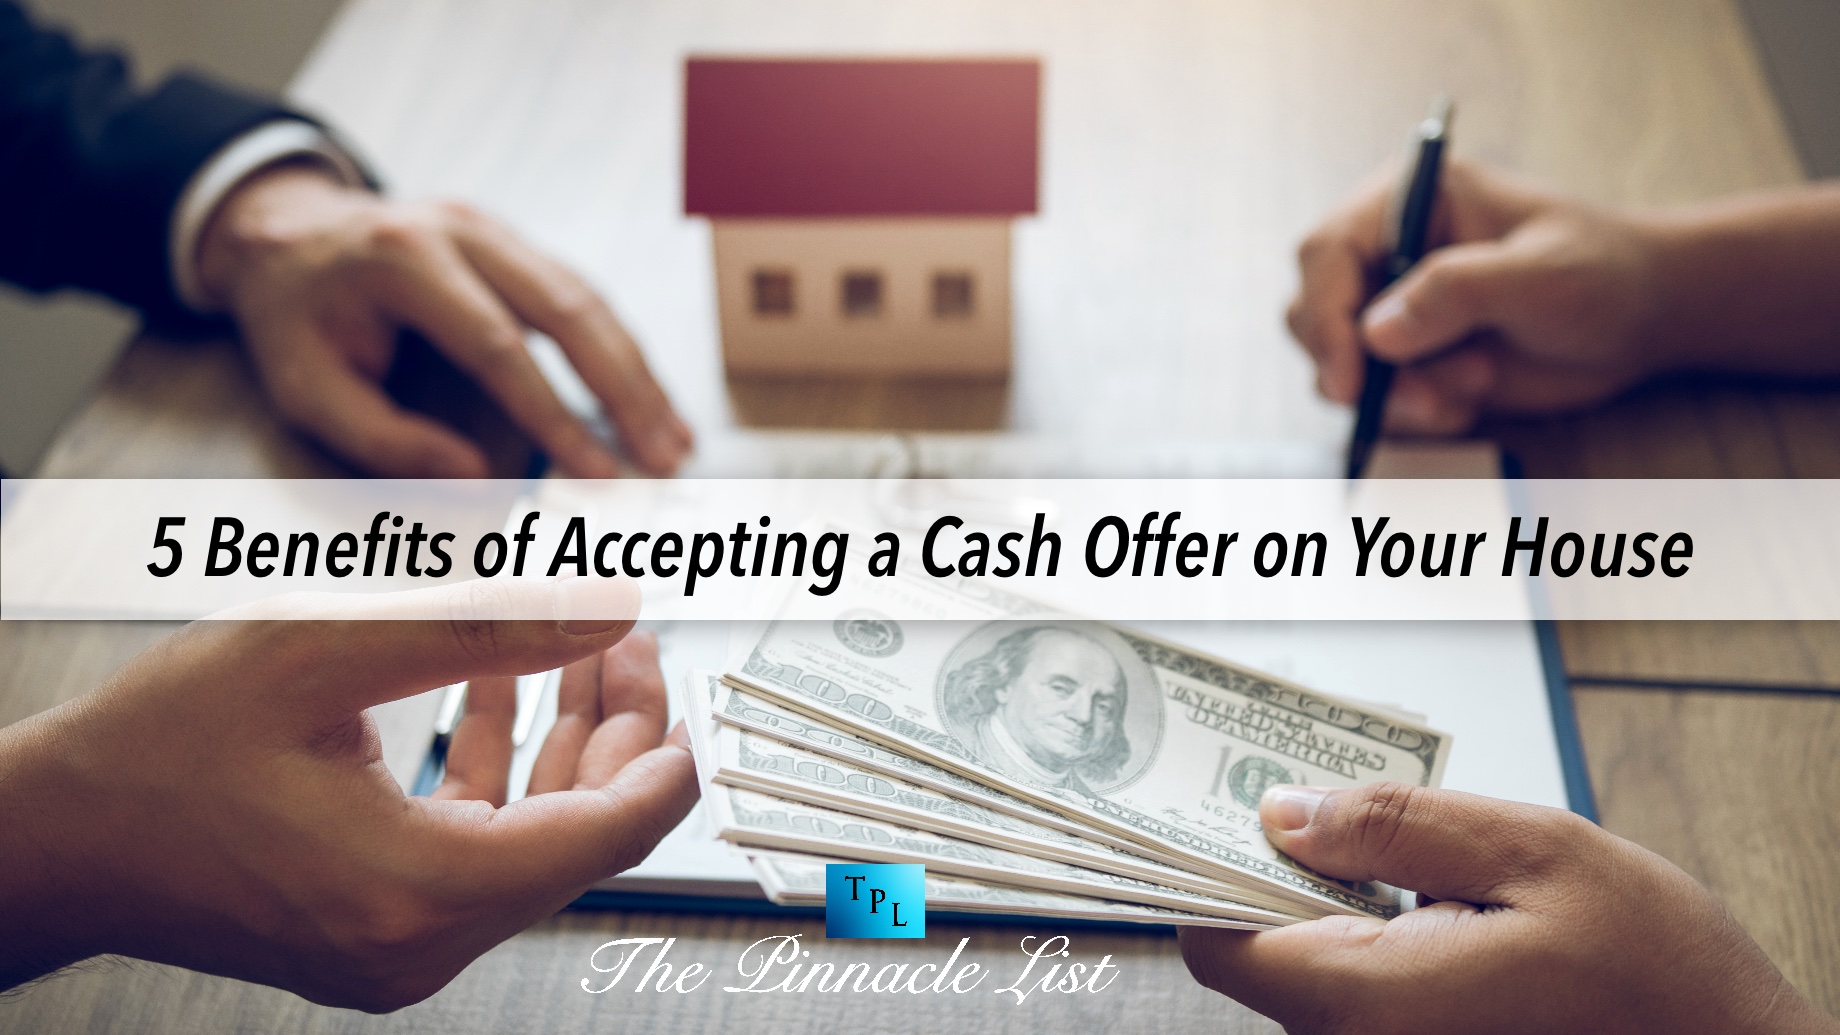 5 Benefits of Accepting a Cash Offer on Your House